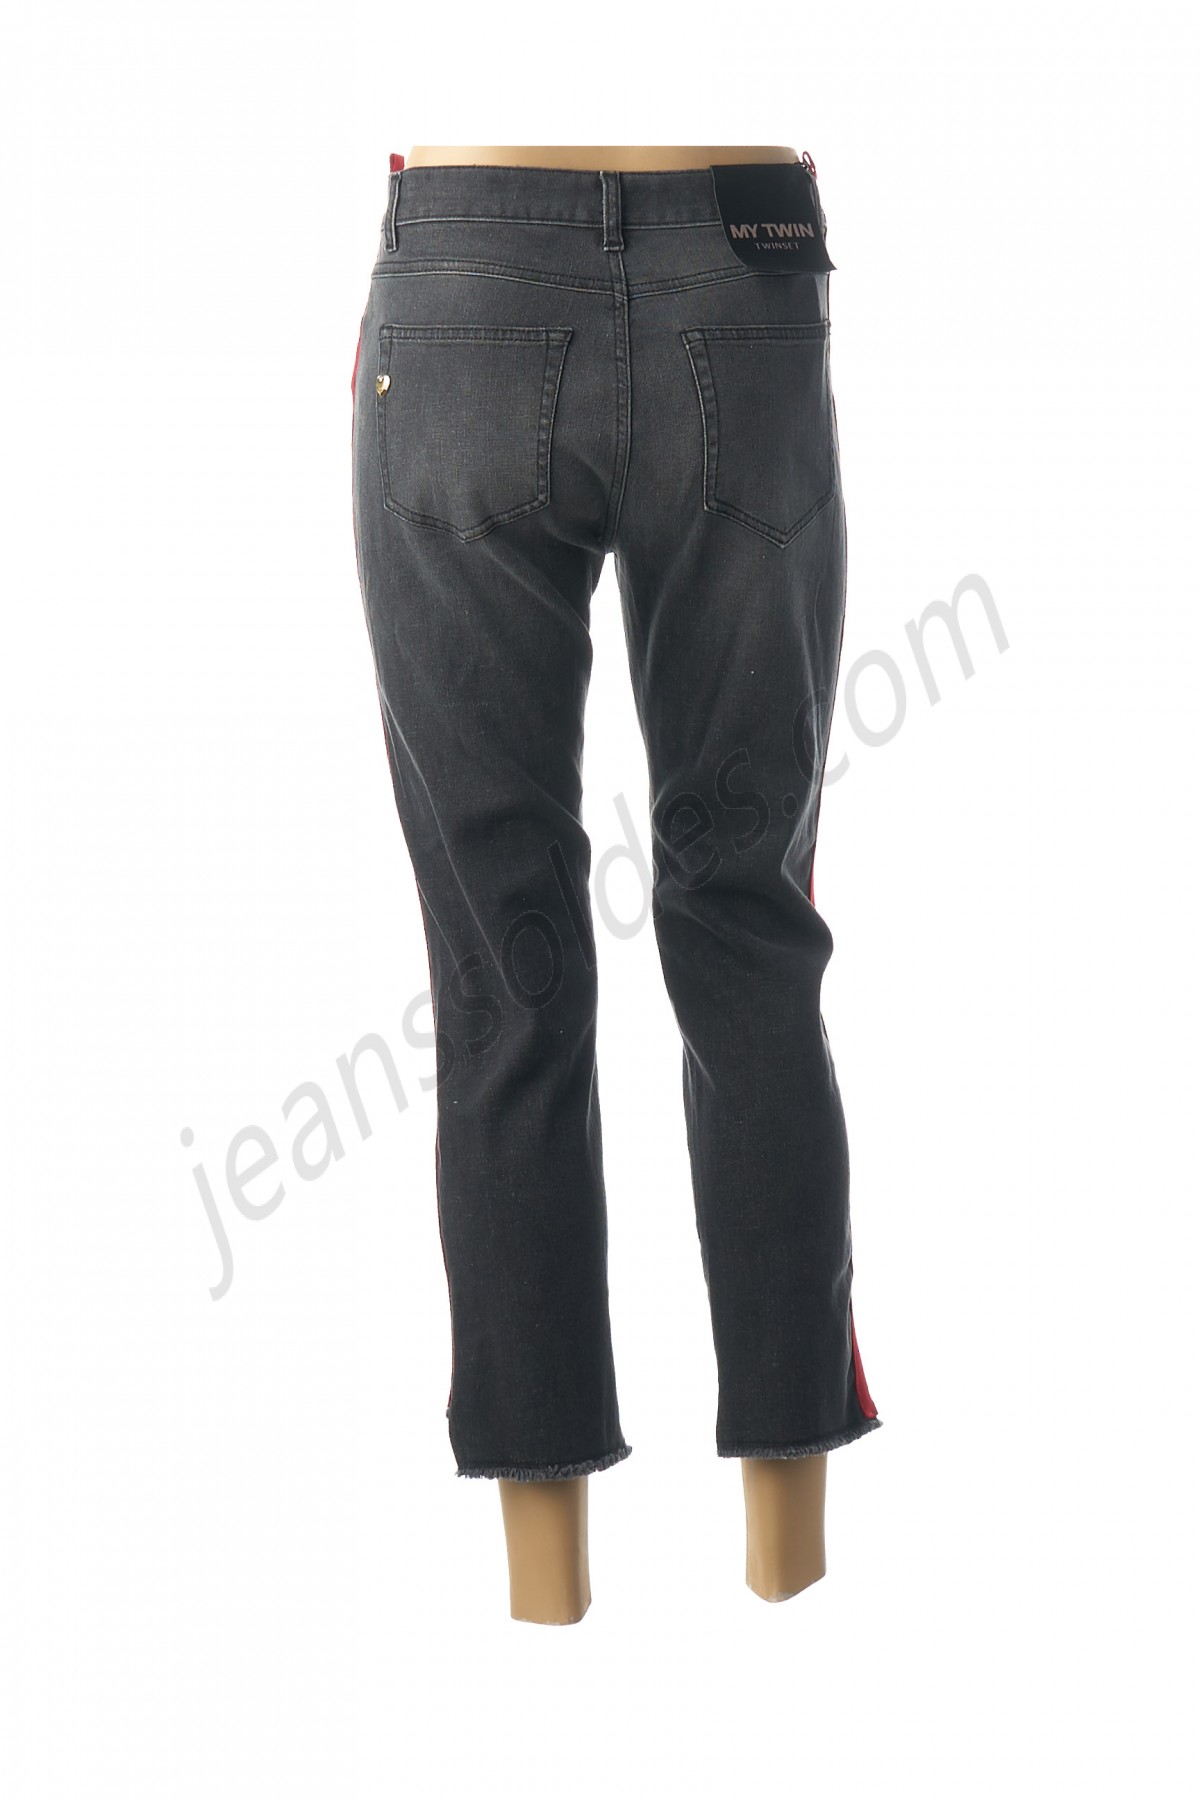 my twin-Jeans coupe slim prix d’amis - -1